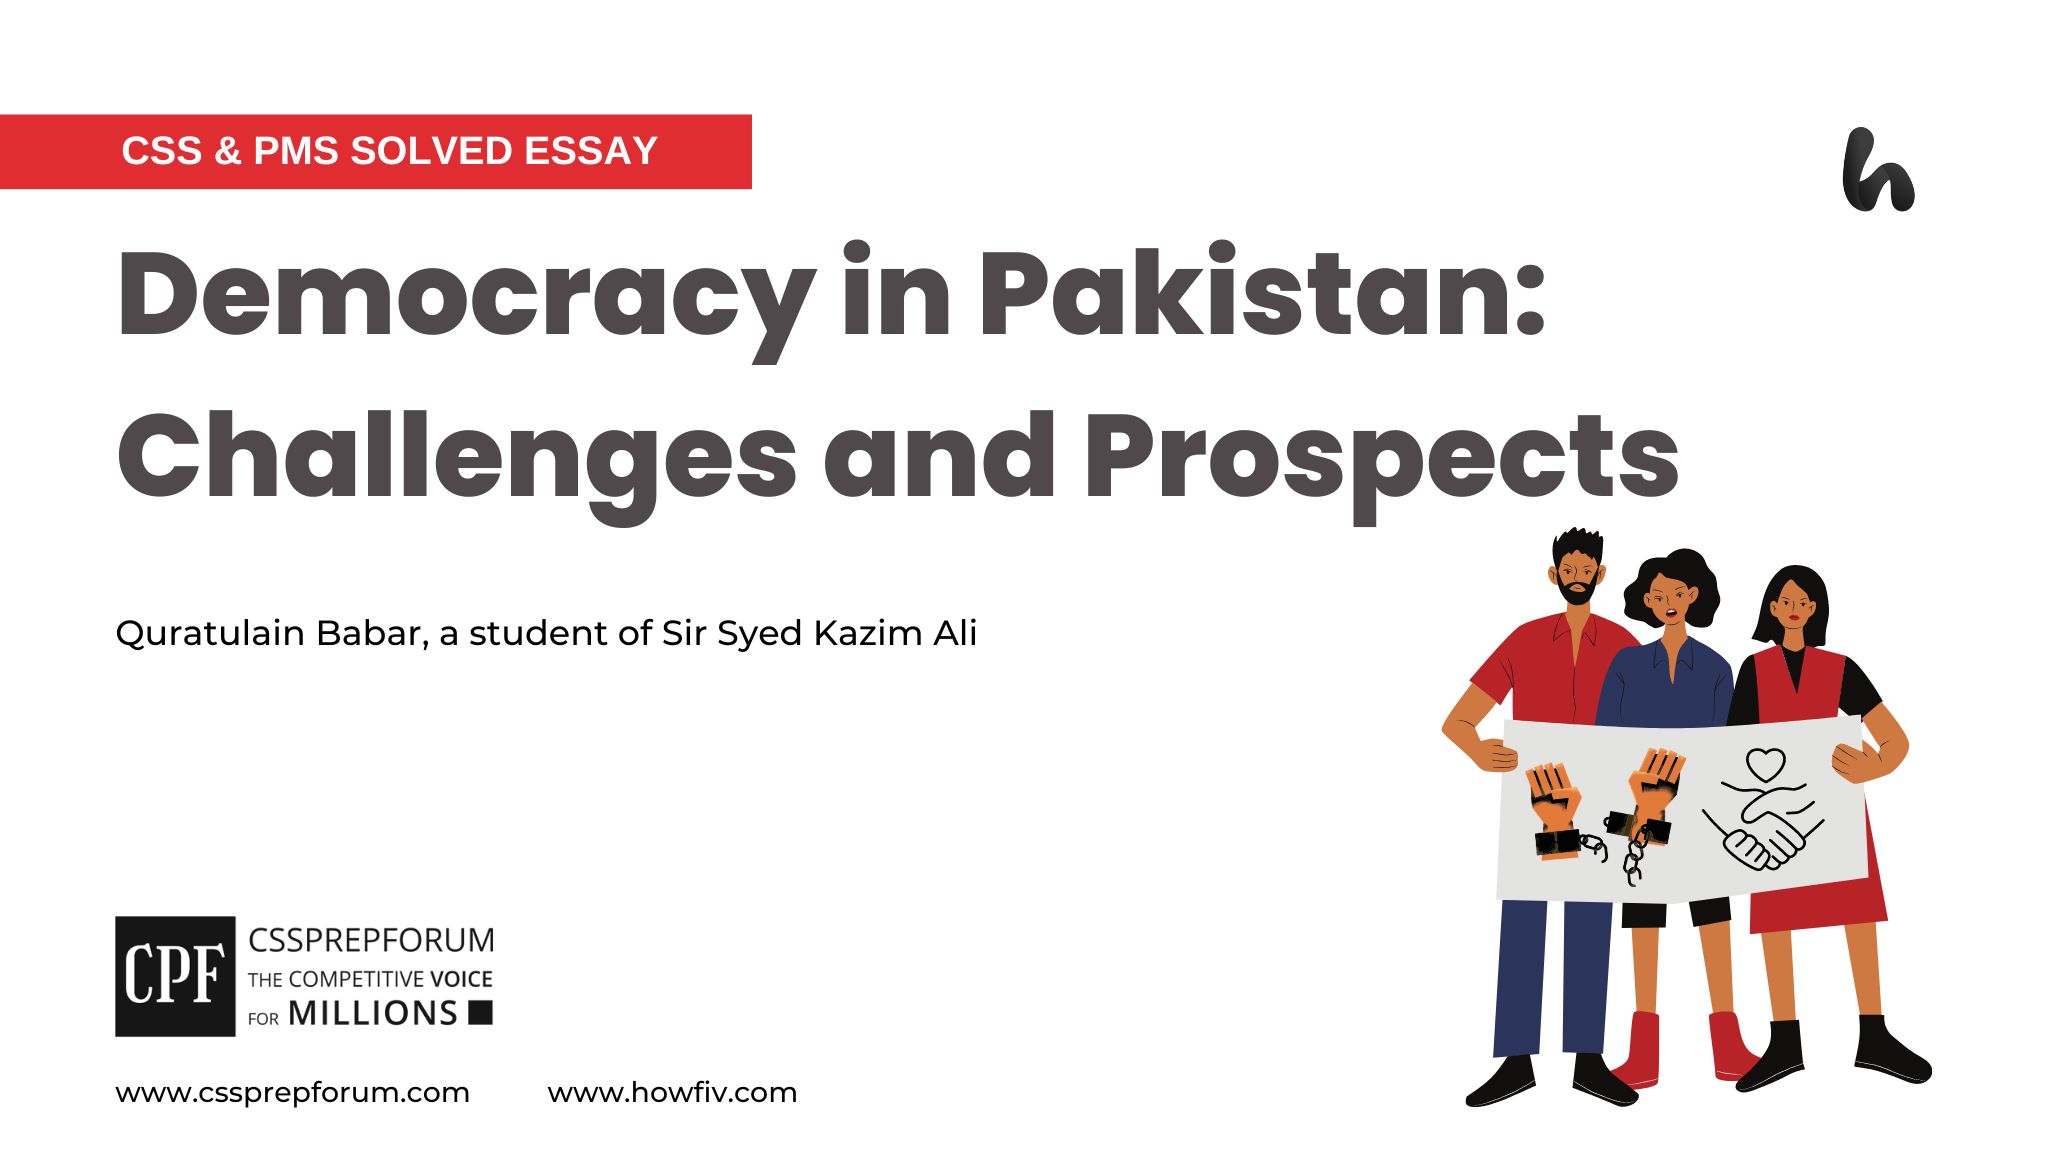 Democracy in Pakistan: Challenges and Prospects by Quratulain Babar